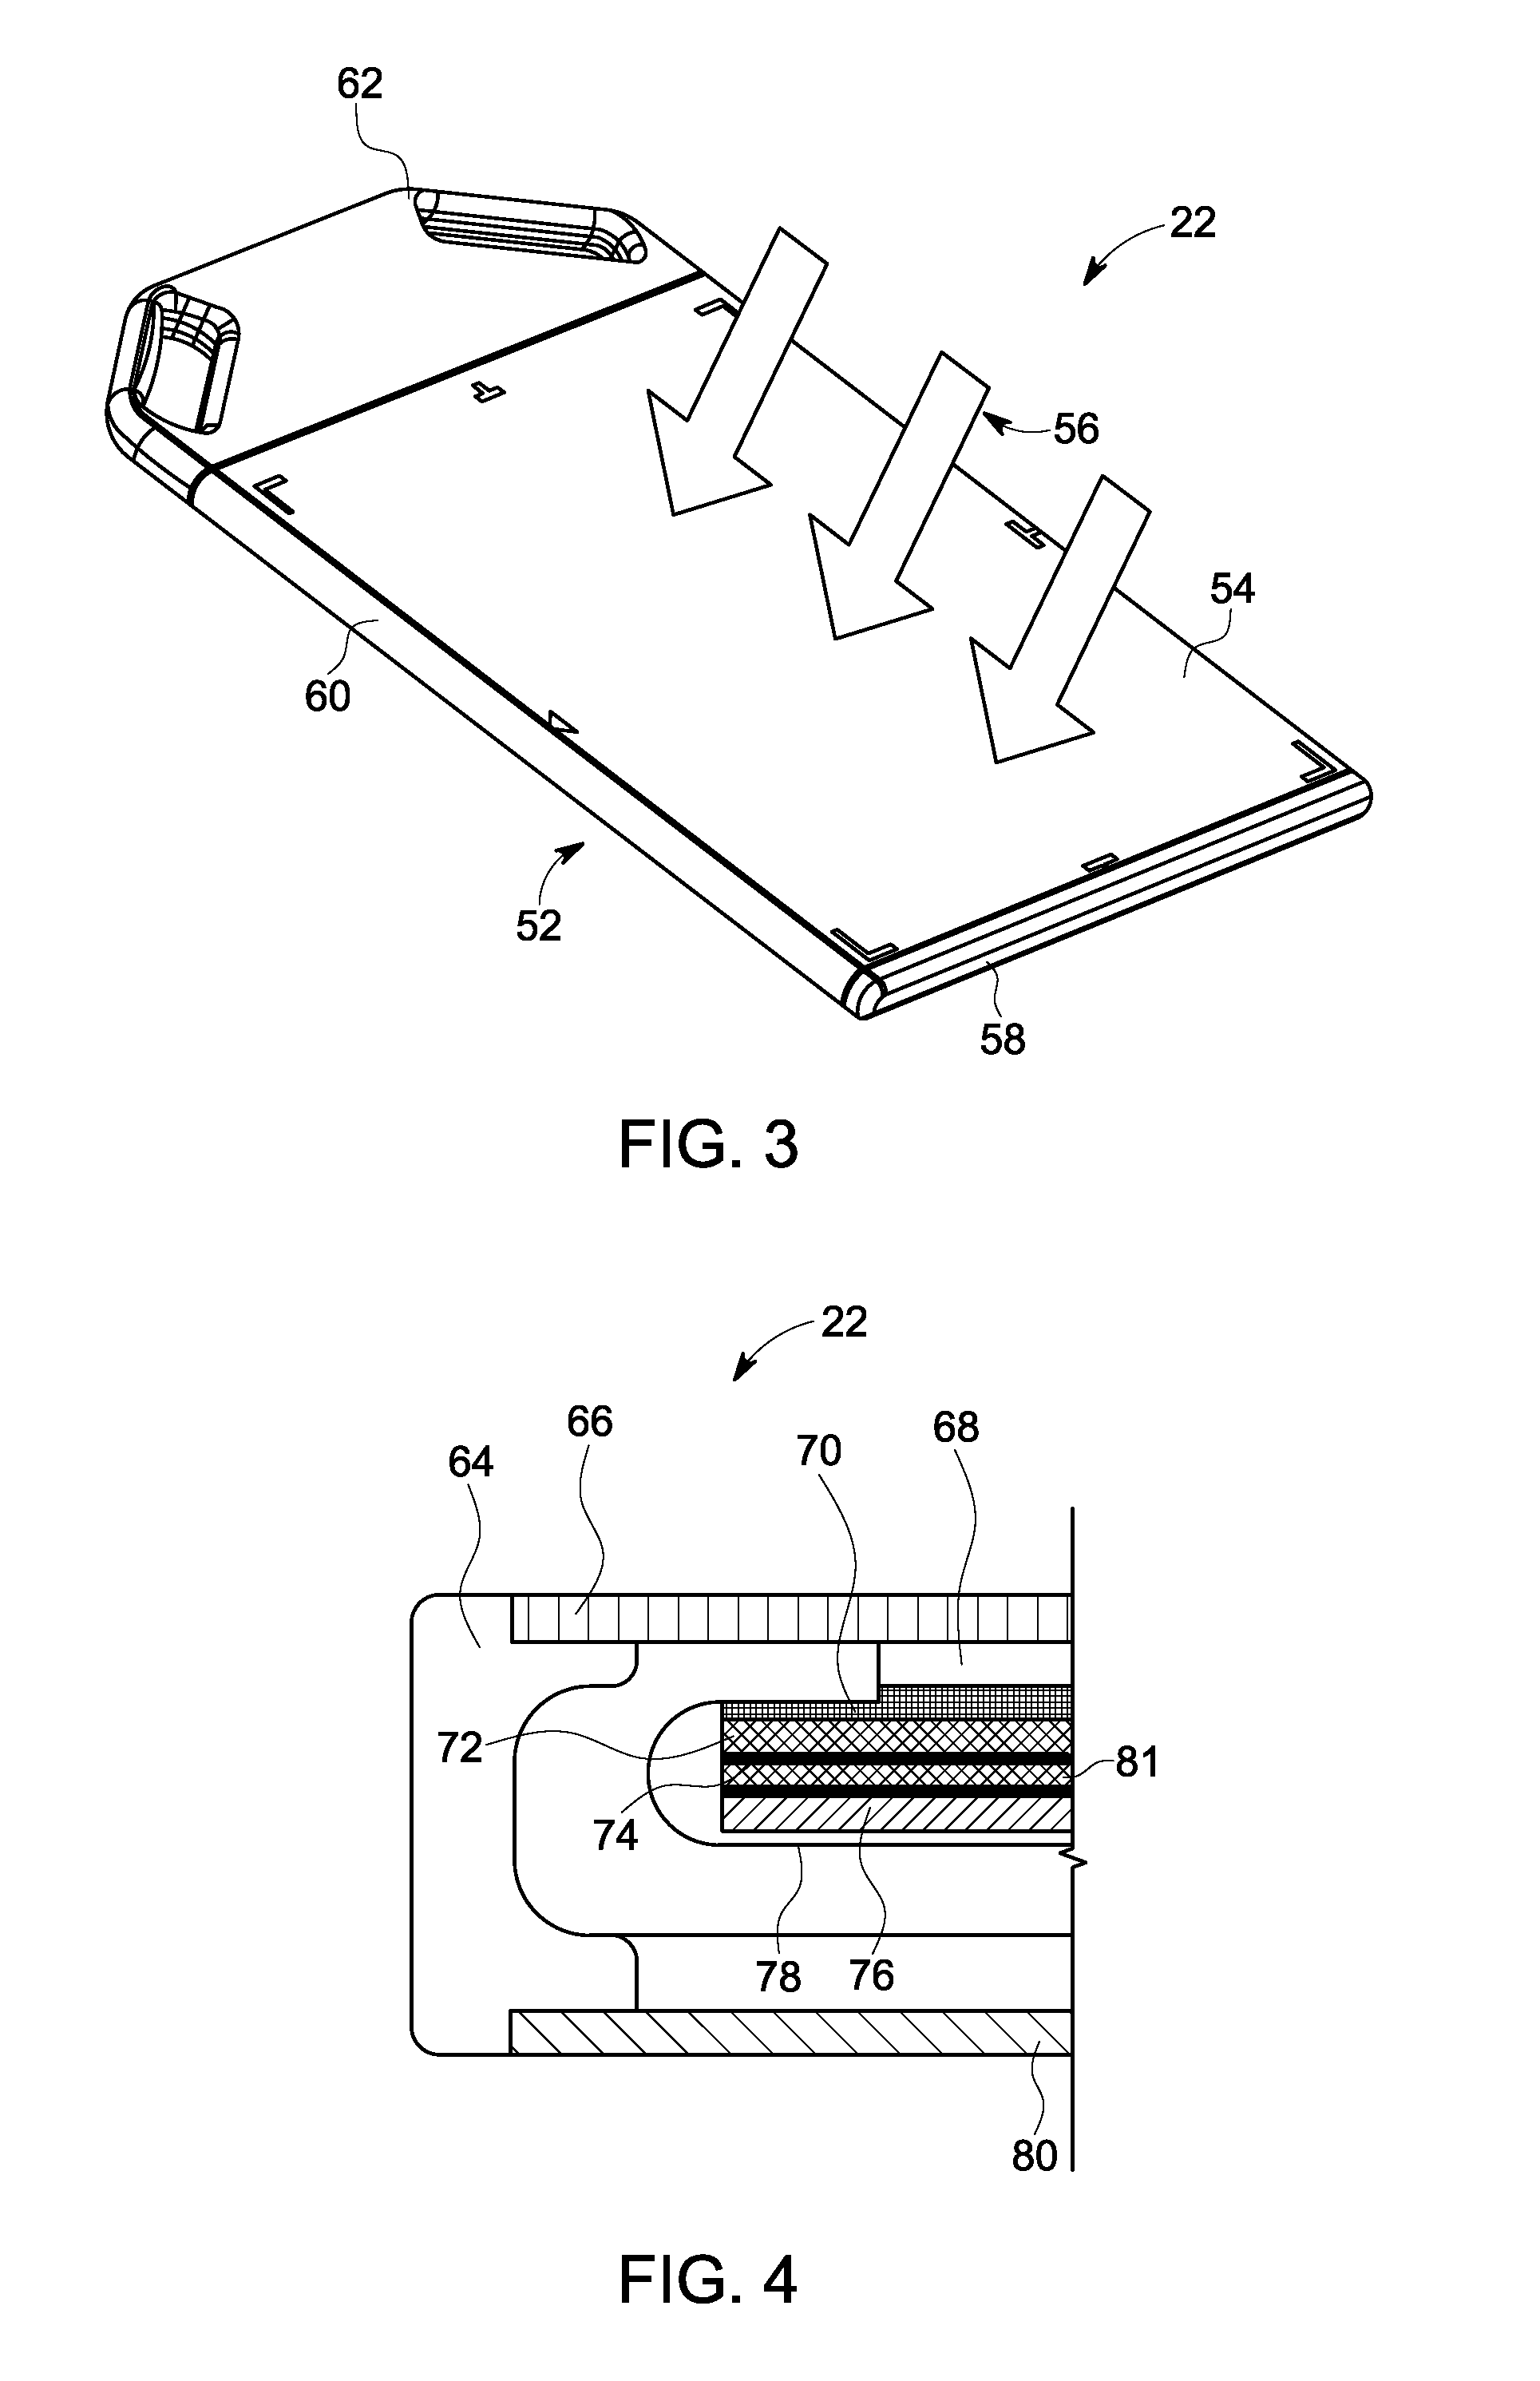 Digital x-ray detector  assembly with elastomeric backscatter shield